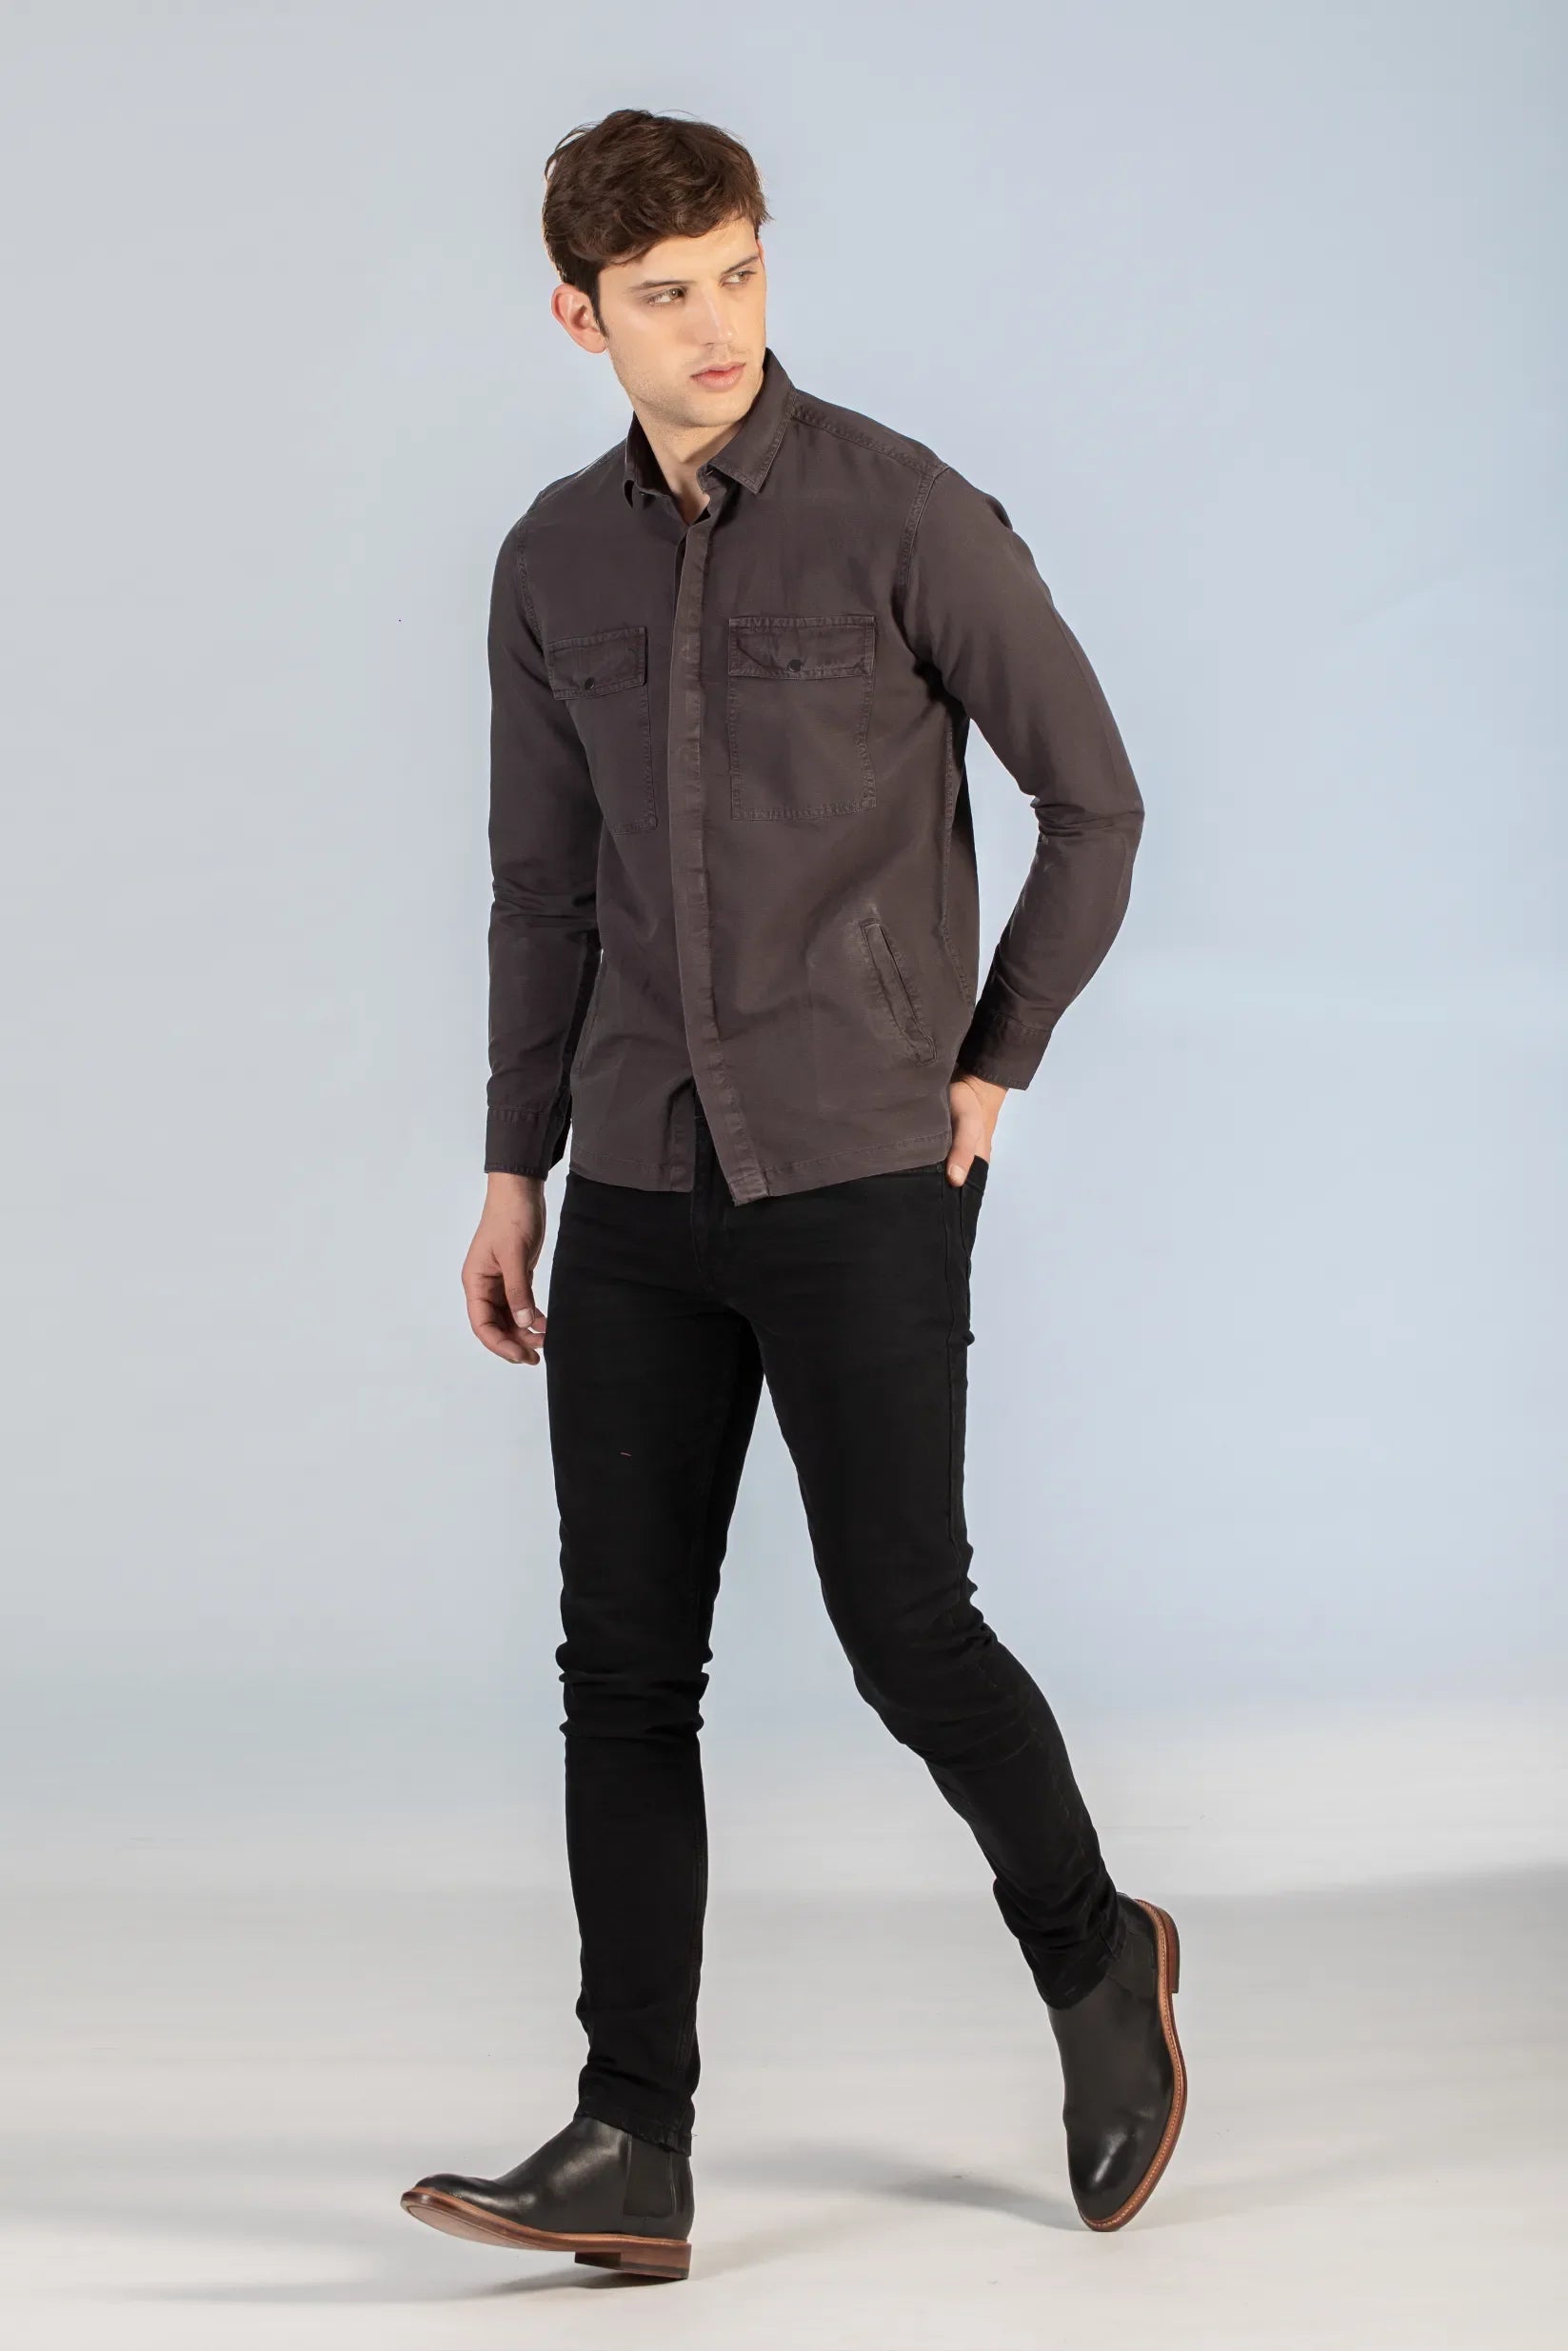 Buy Over-Dyed Double  Pocket Shirt Online.